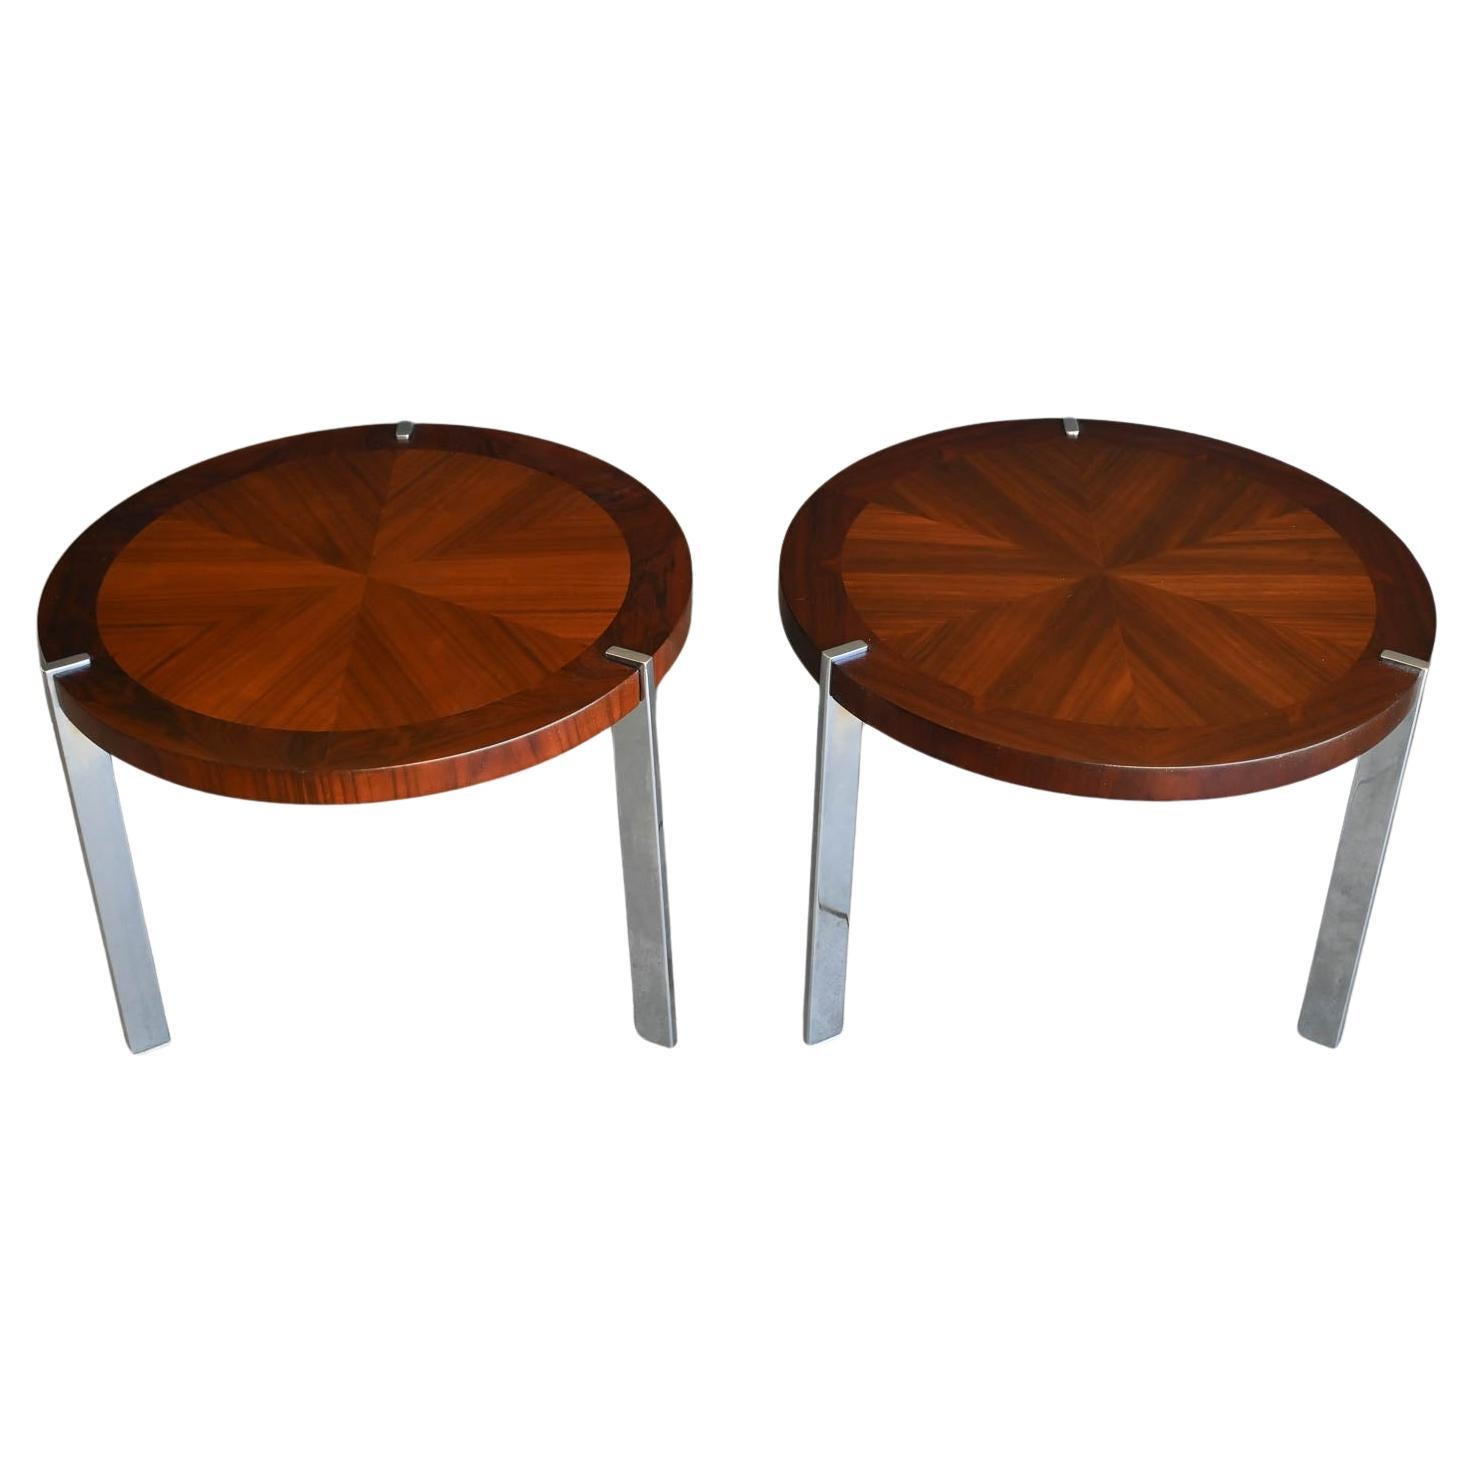 Pair of Rosewood, Walnut and Chrome Side Tables from Lane, ca. 1965